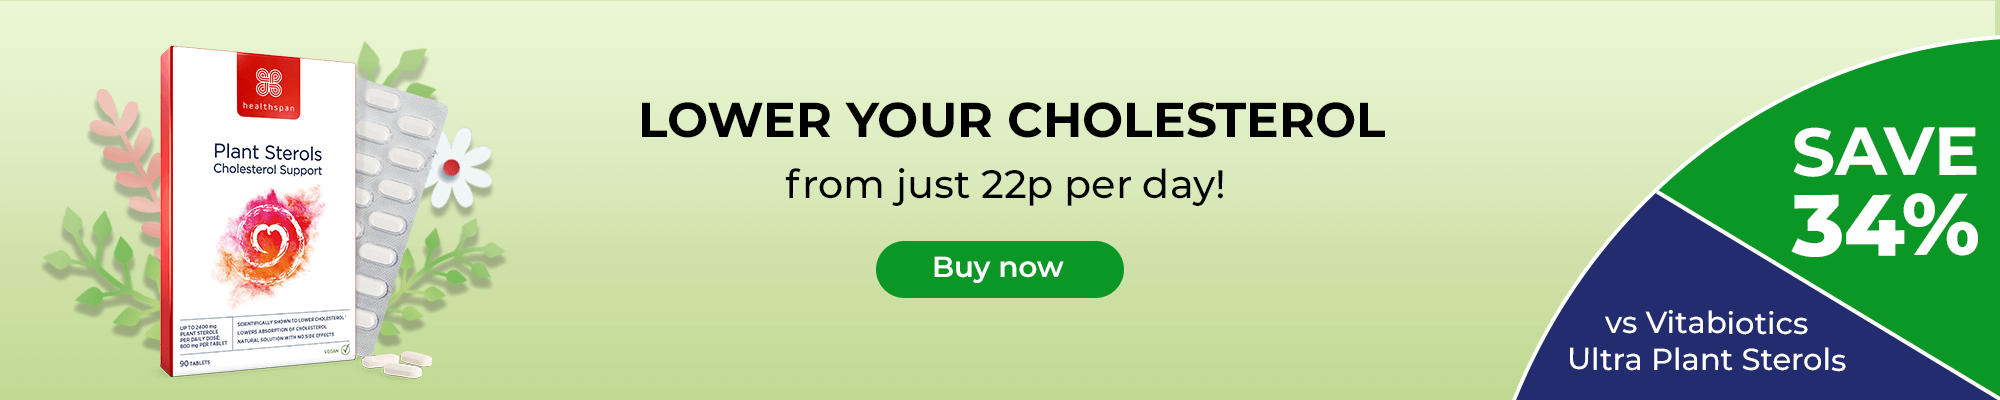 Plant Sterols - lower your cholesterol from just 22p per day! Save 34% compared to Vitabiotics Ultra Plant Sterols. Buy now.